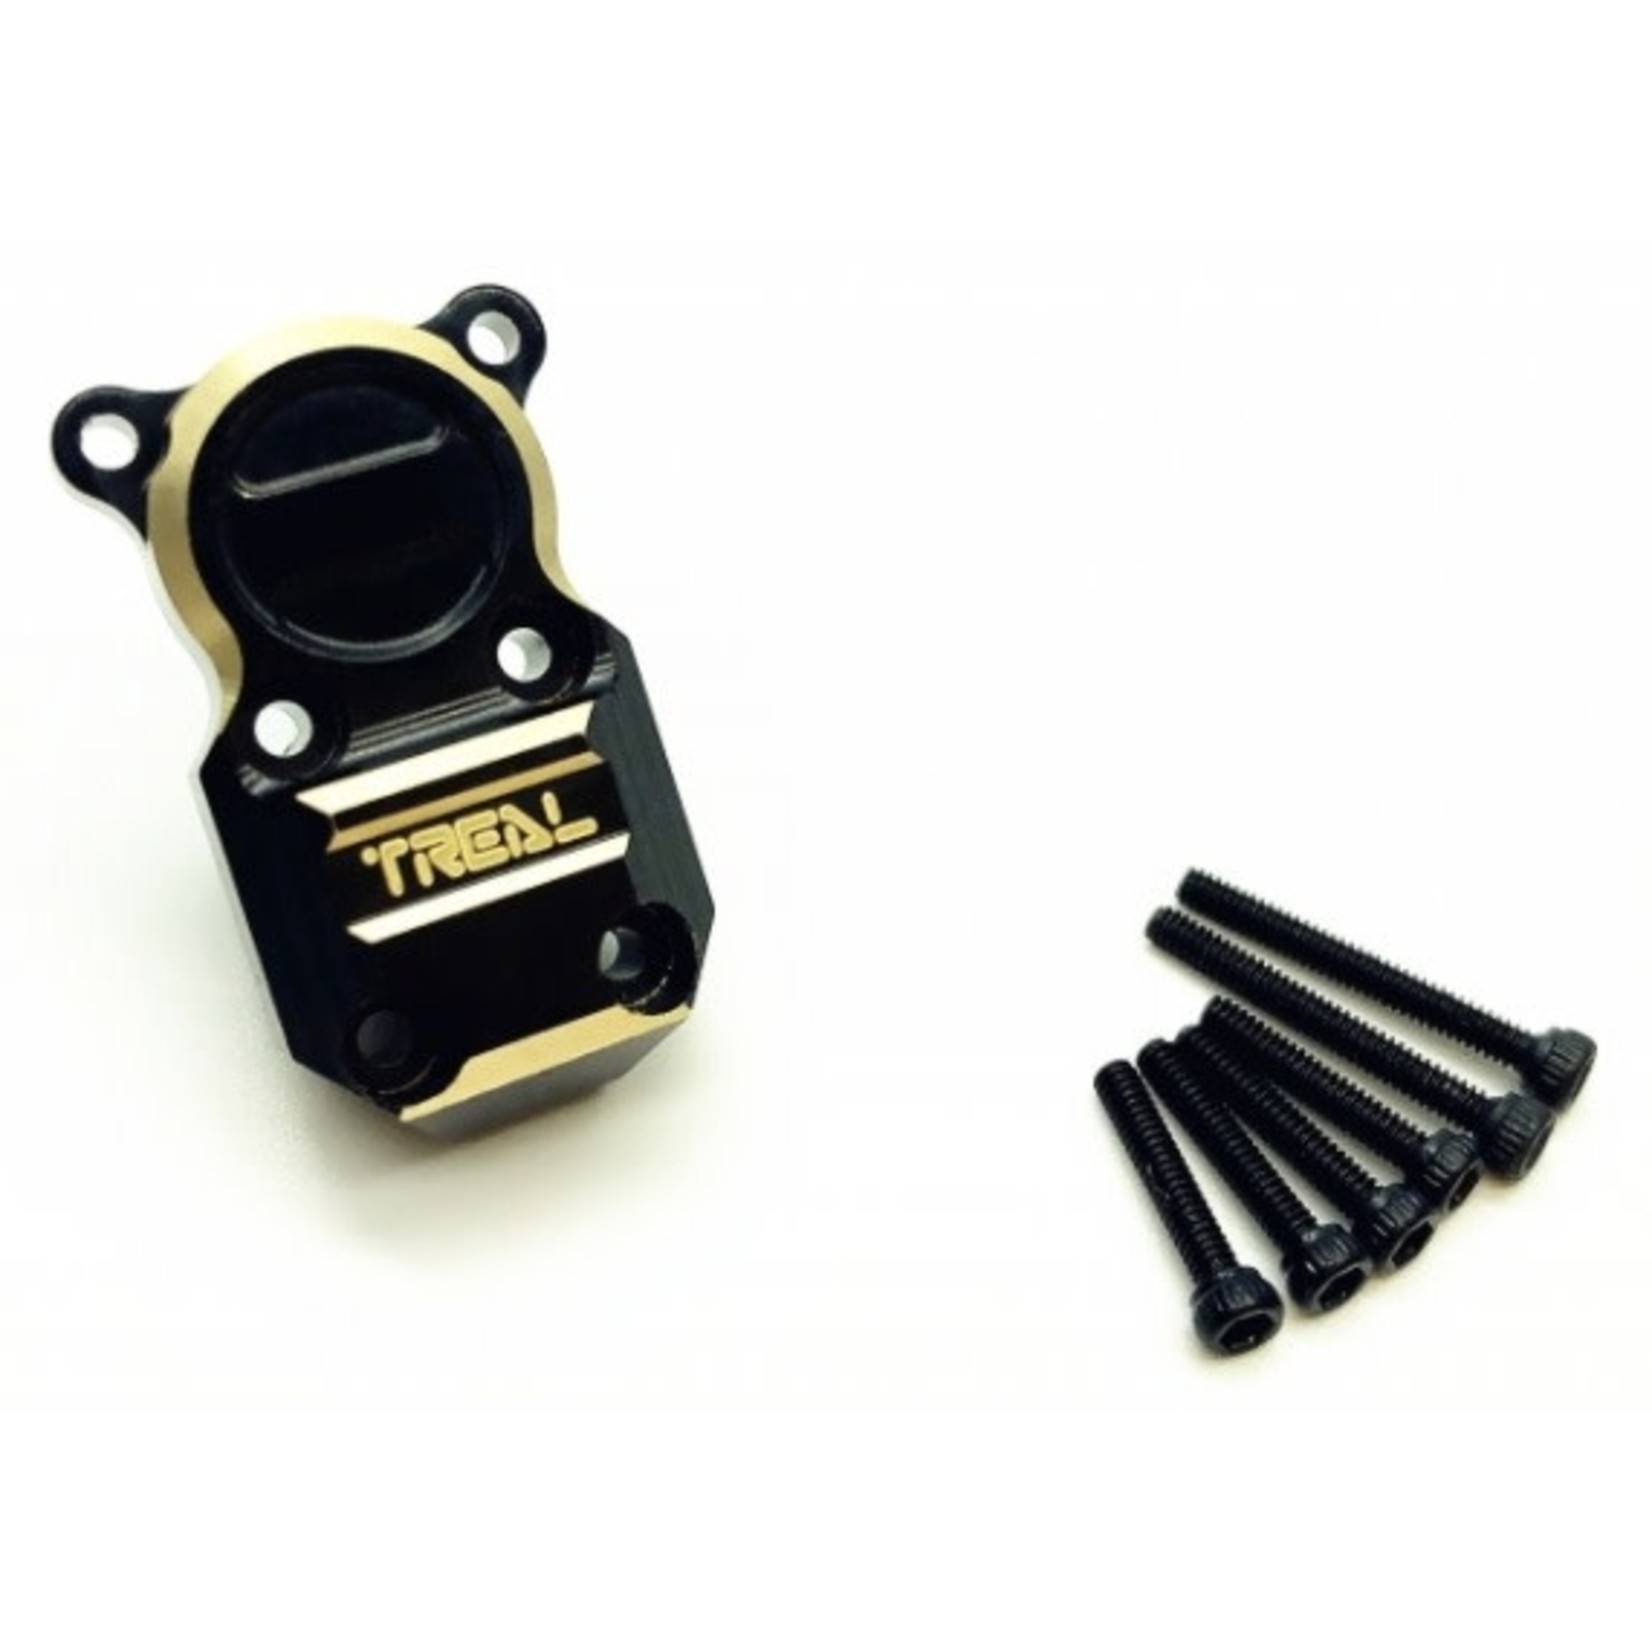 Treal Treal Axial SCX24 90081 Brass Diff Cover(1) Fitting Both Front and Rear Axle - Black #X002JTICS3